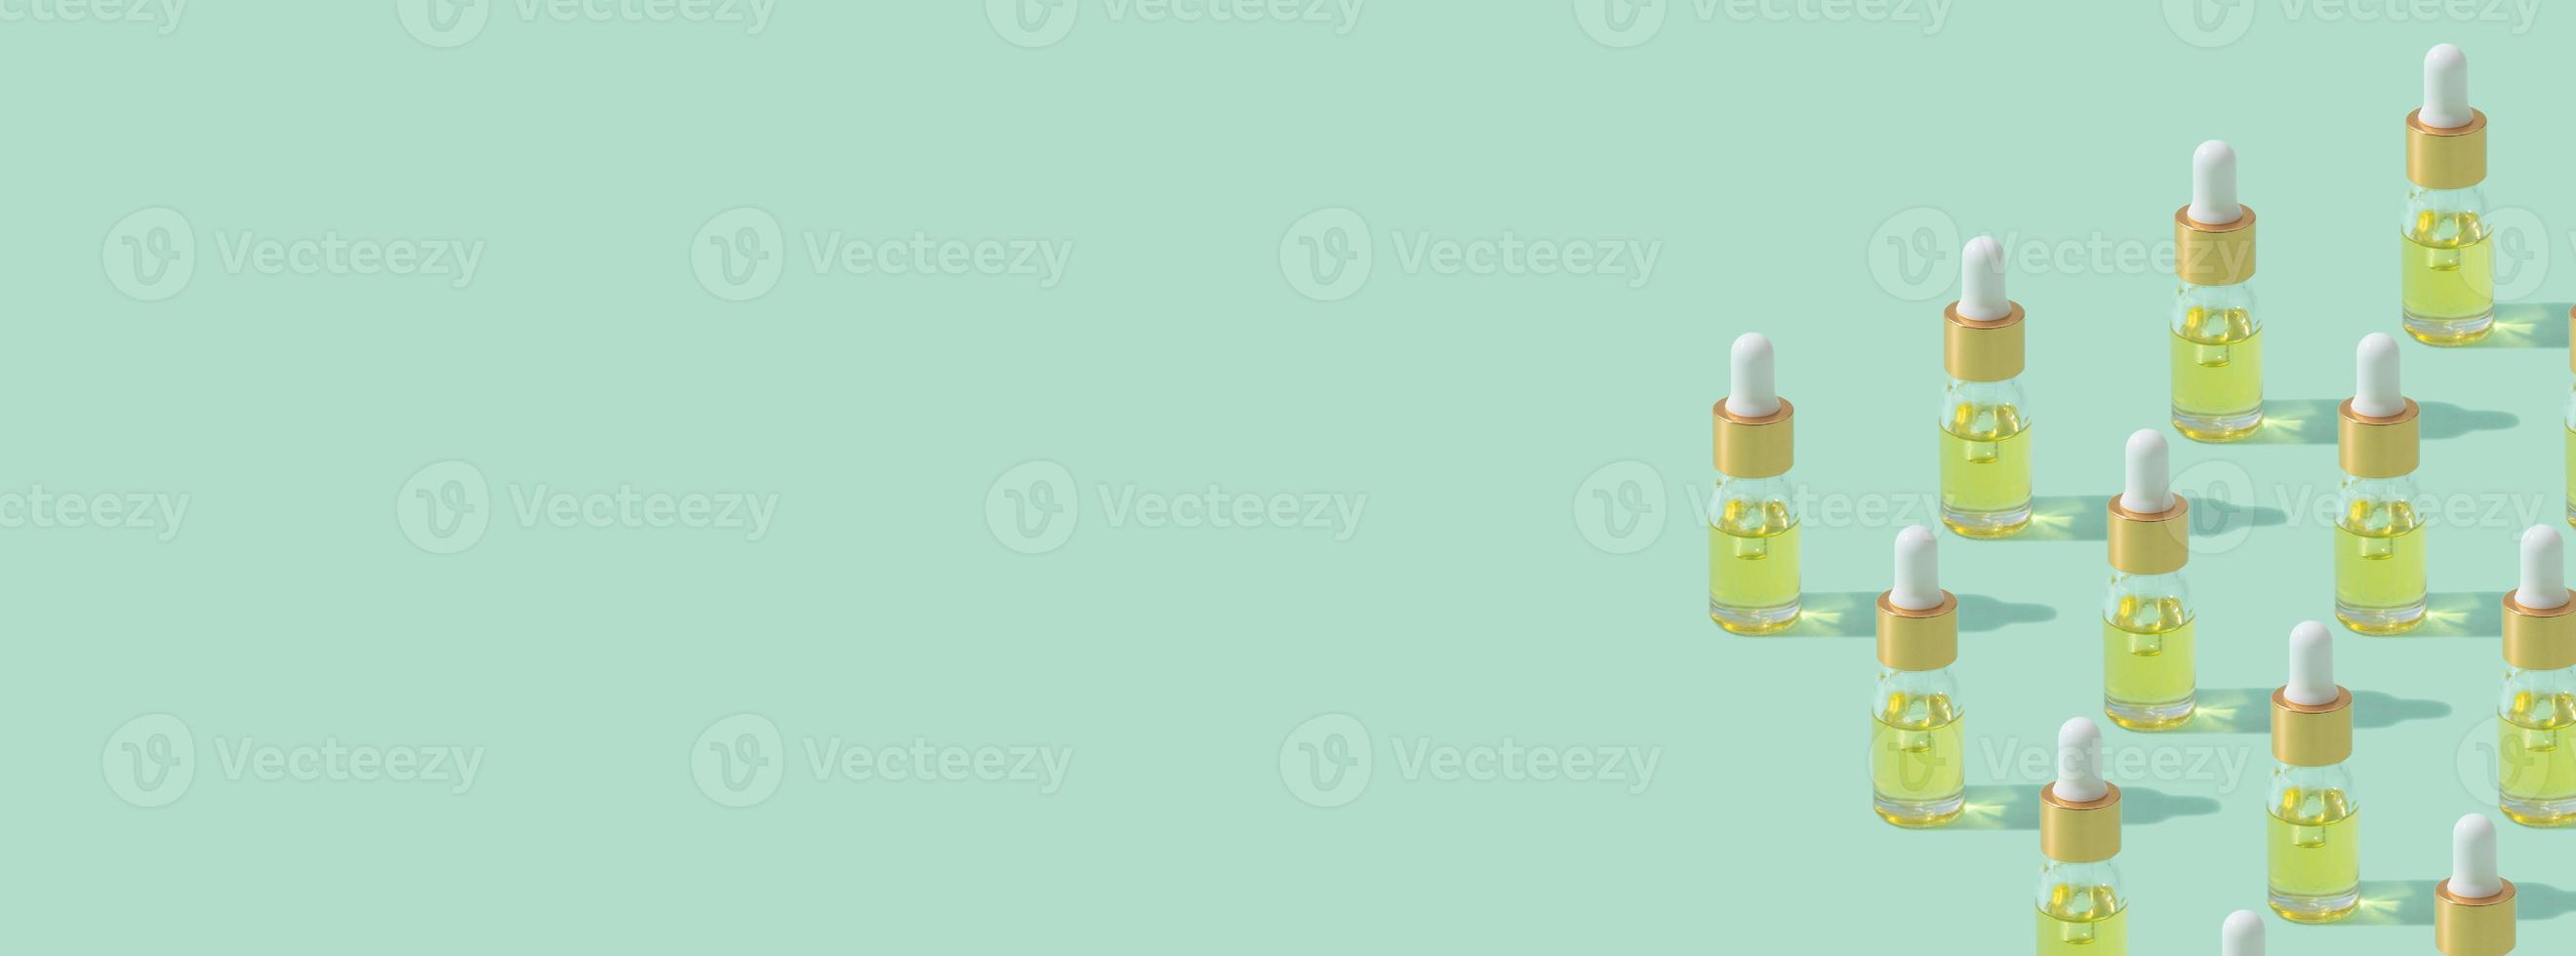 Banner with dropper bottles pattern cosmetic oil or serum with pipette on mint background copy space photo